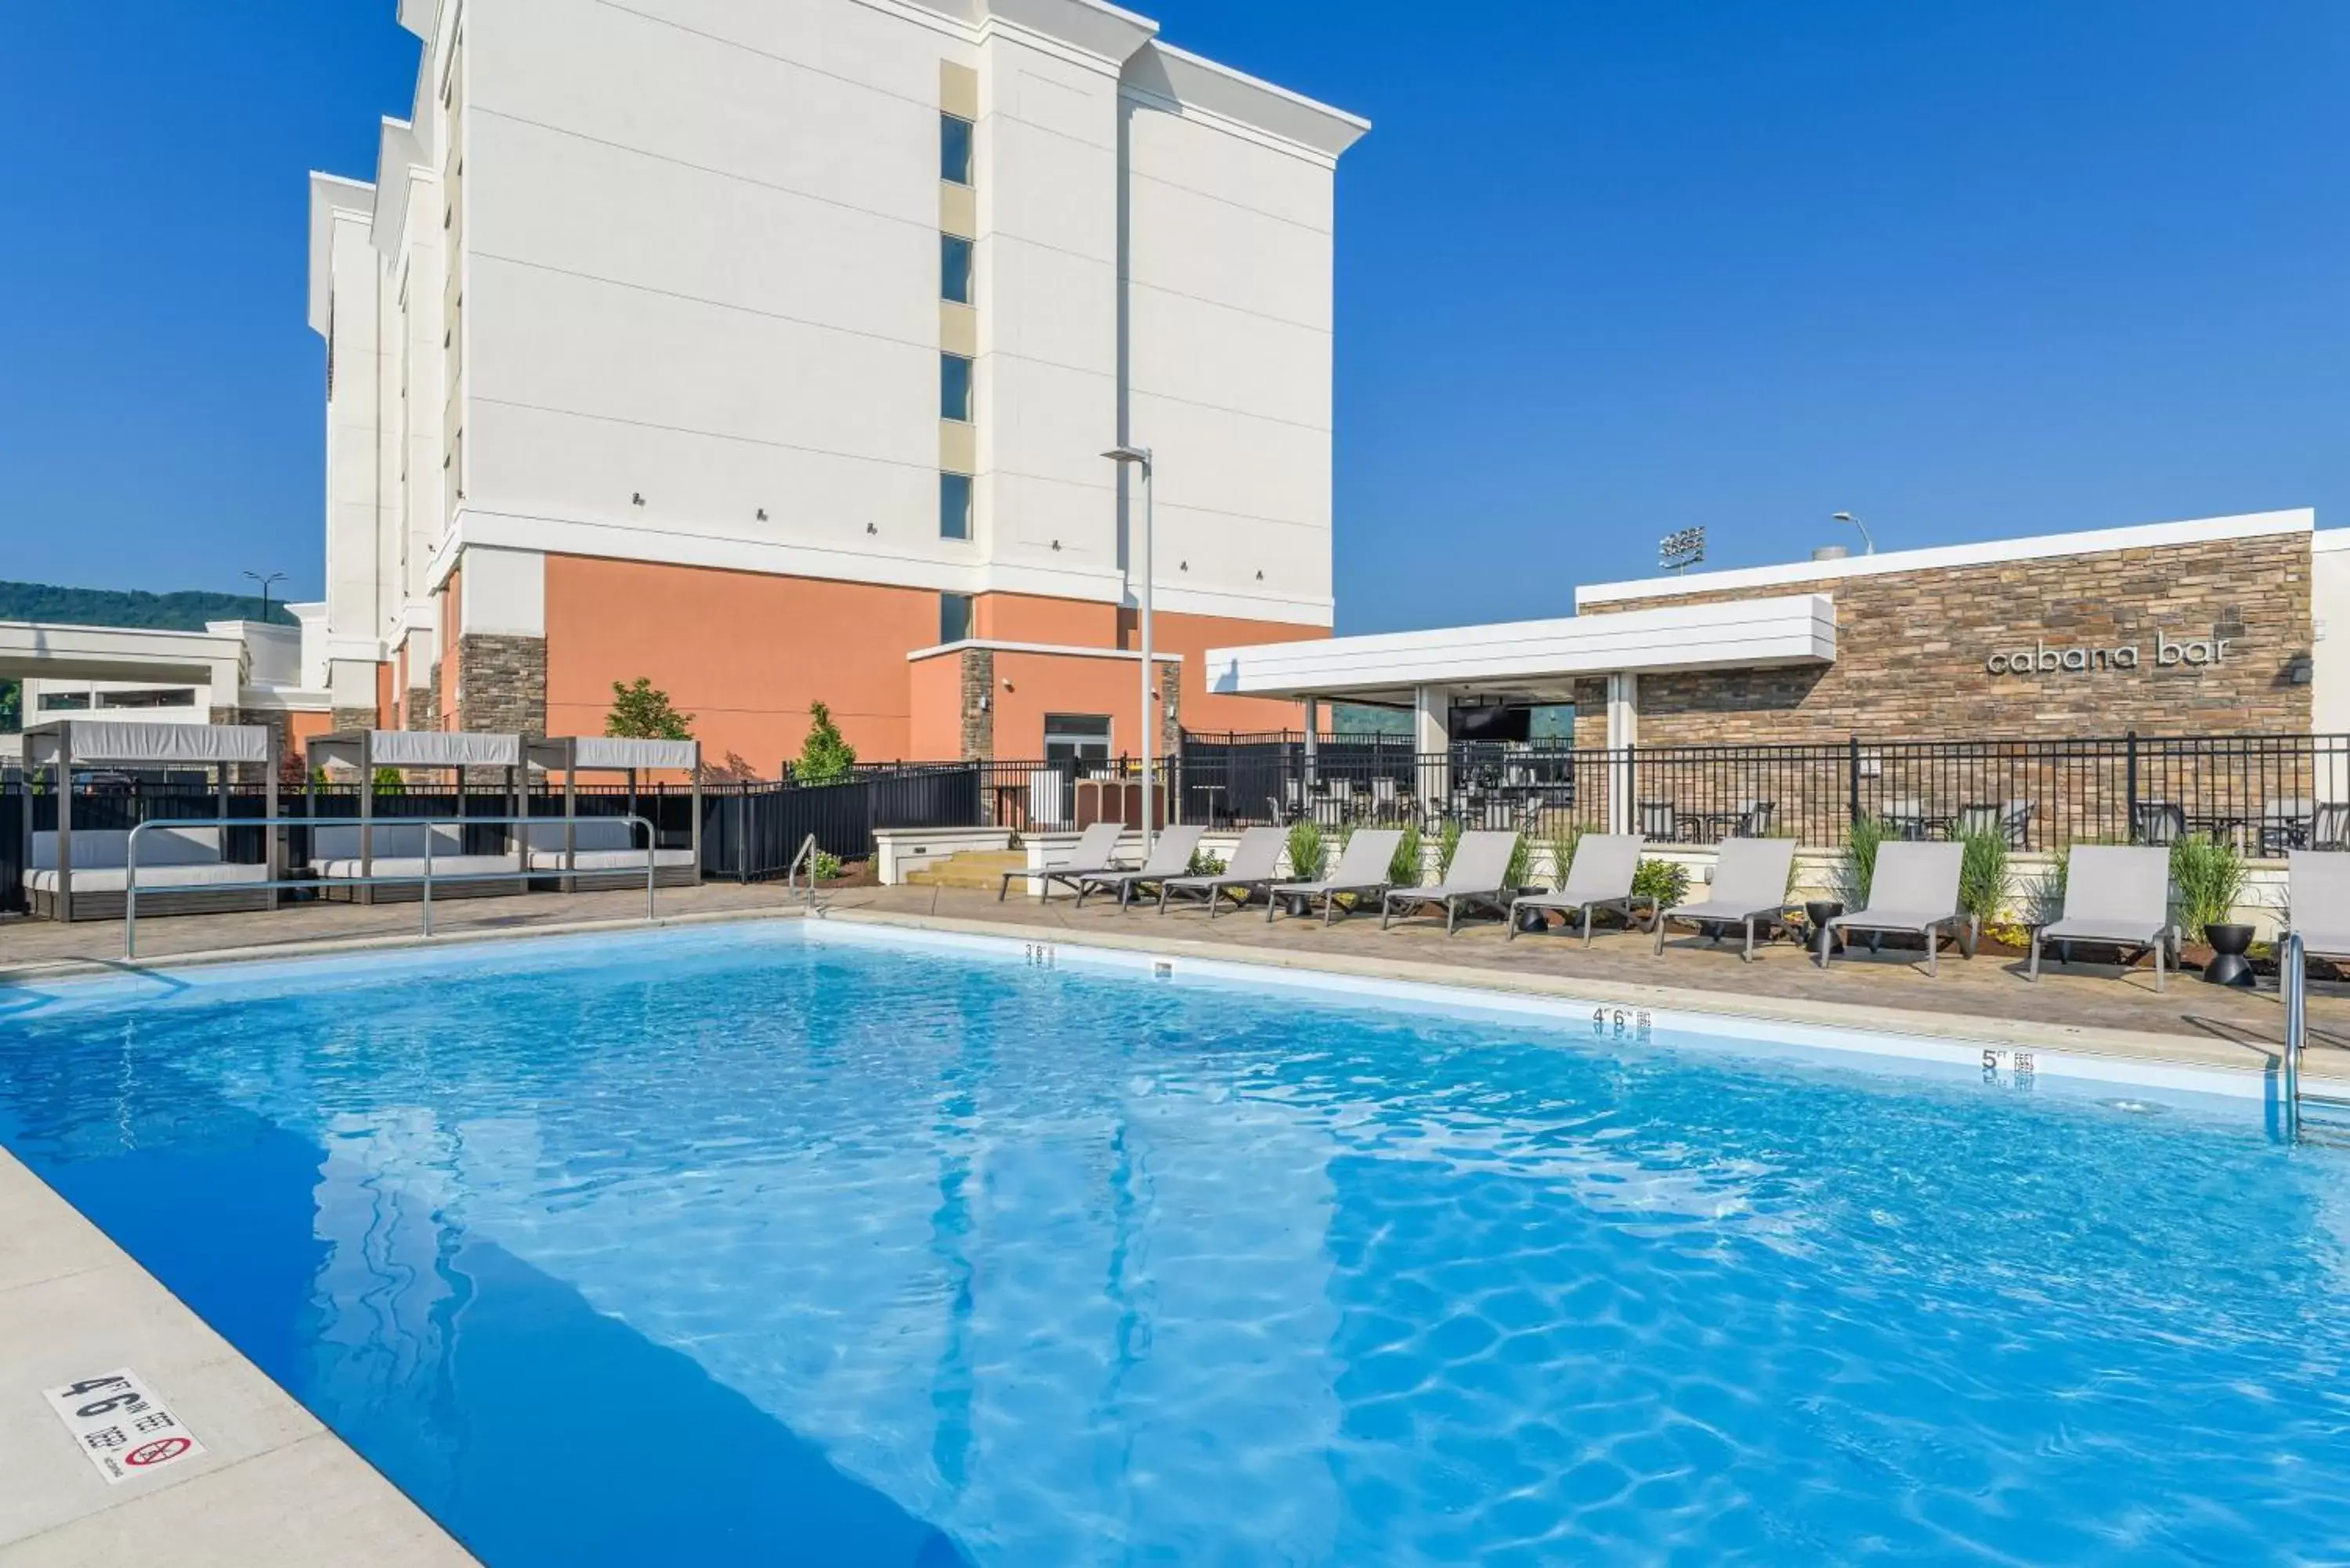 Lounge or bar, Swimming Pool in Tioga Downs Casino and Resort